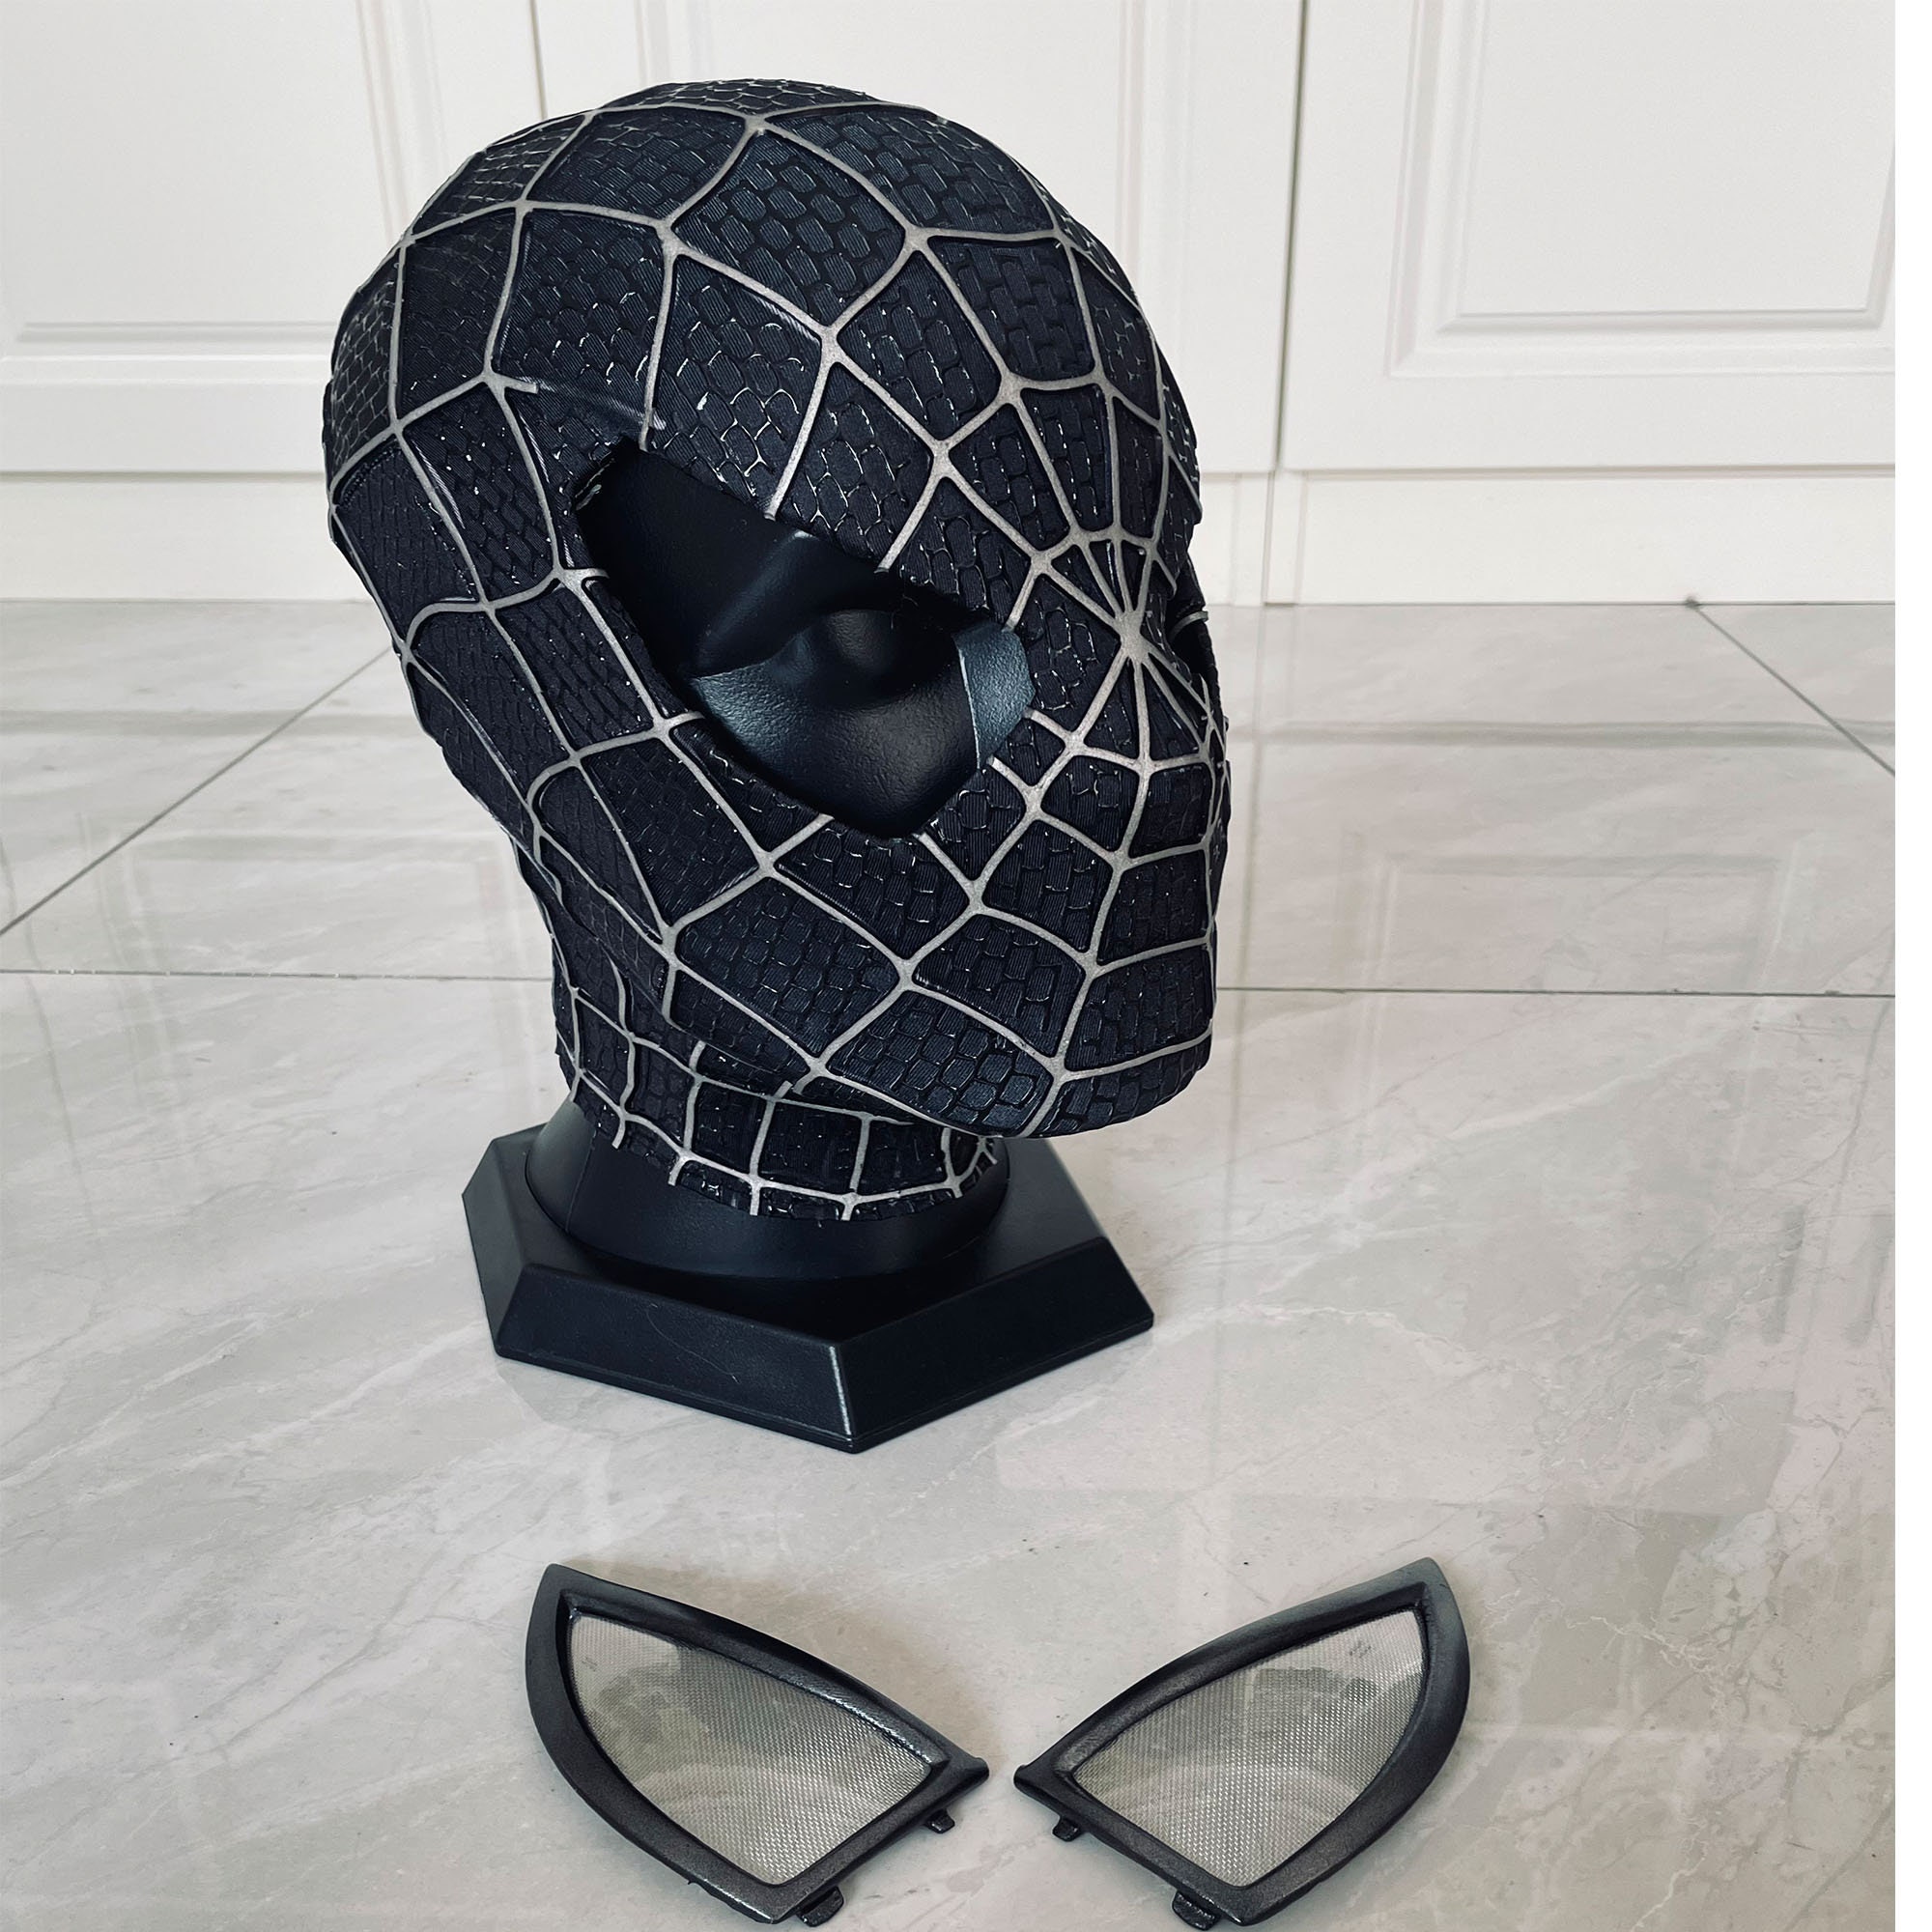 Customized Sam Raimi Spiderman Mask, Black Spiderman Mask Cosplay Adults  With Faceshell&3d Rubber Web, Wearable Movie Prop Replica -  Israel